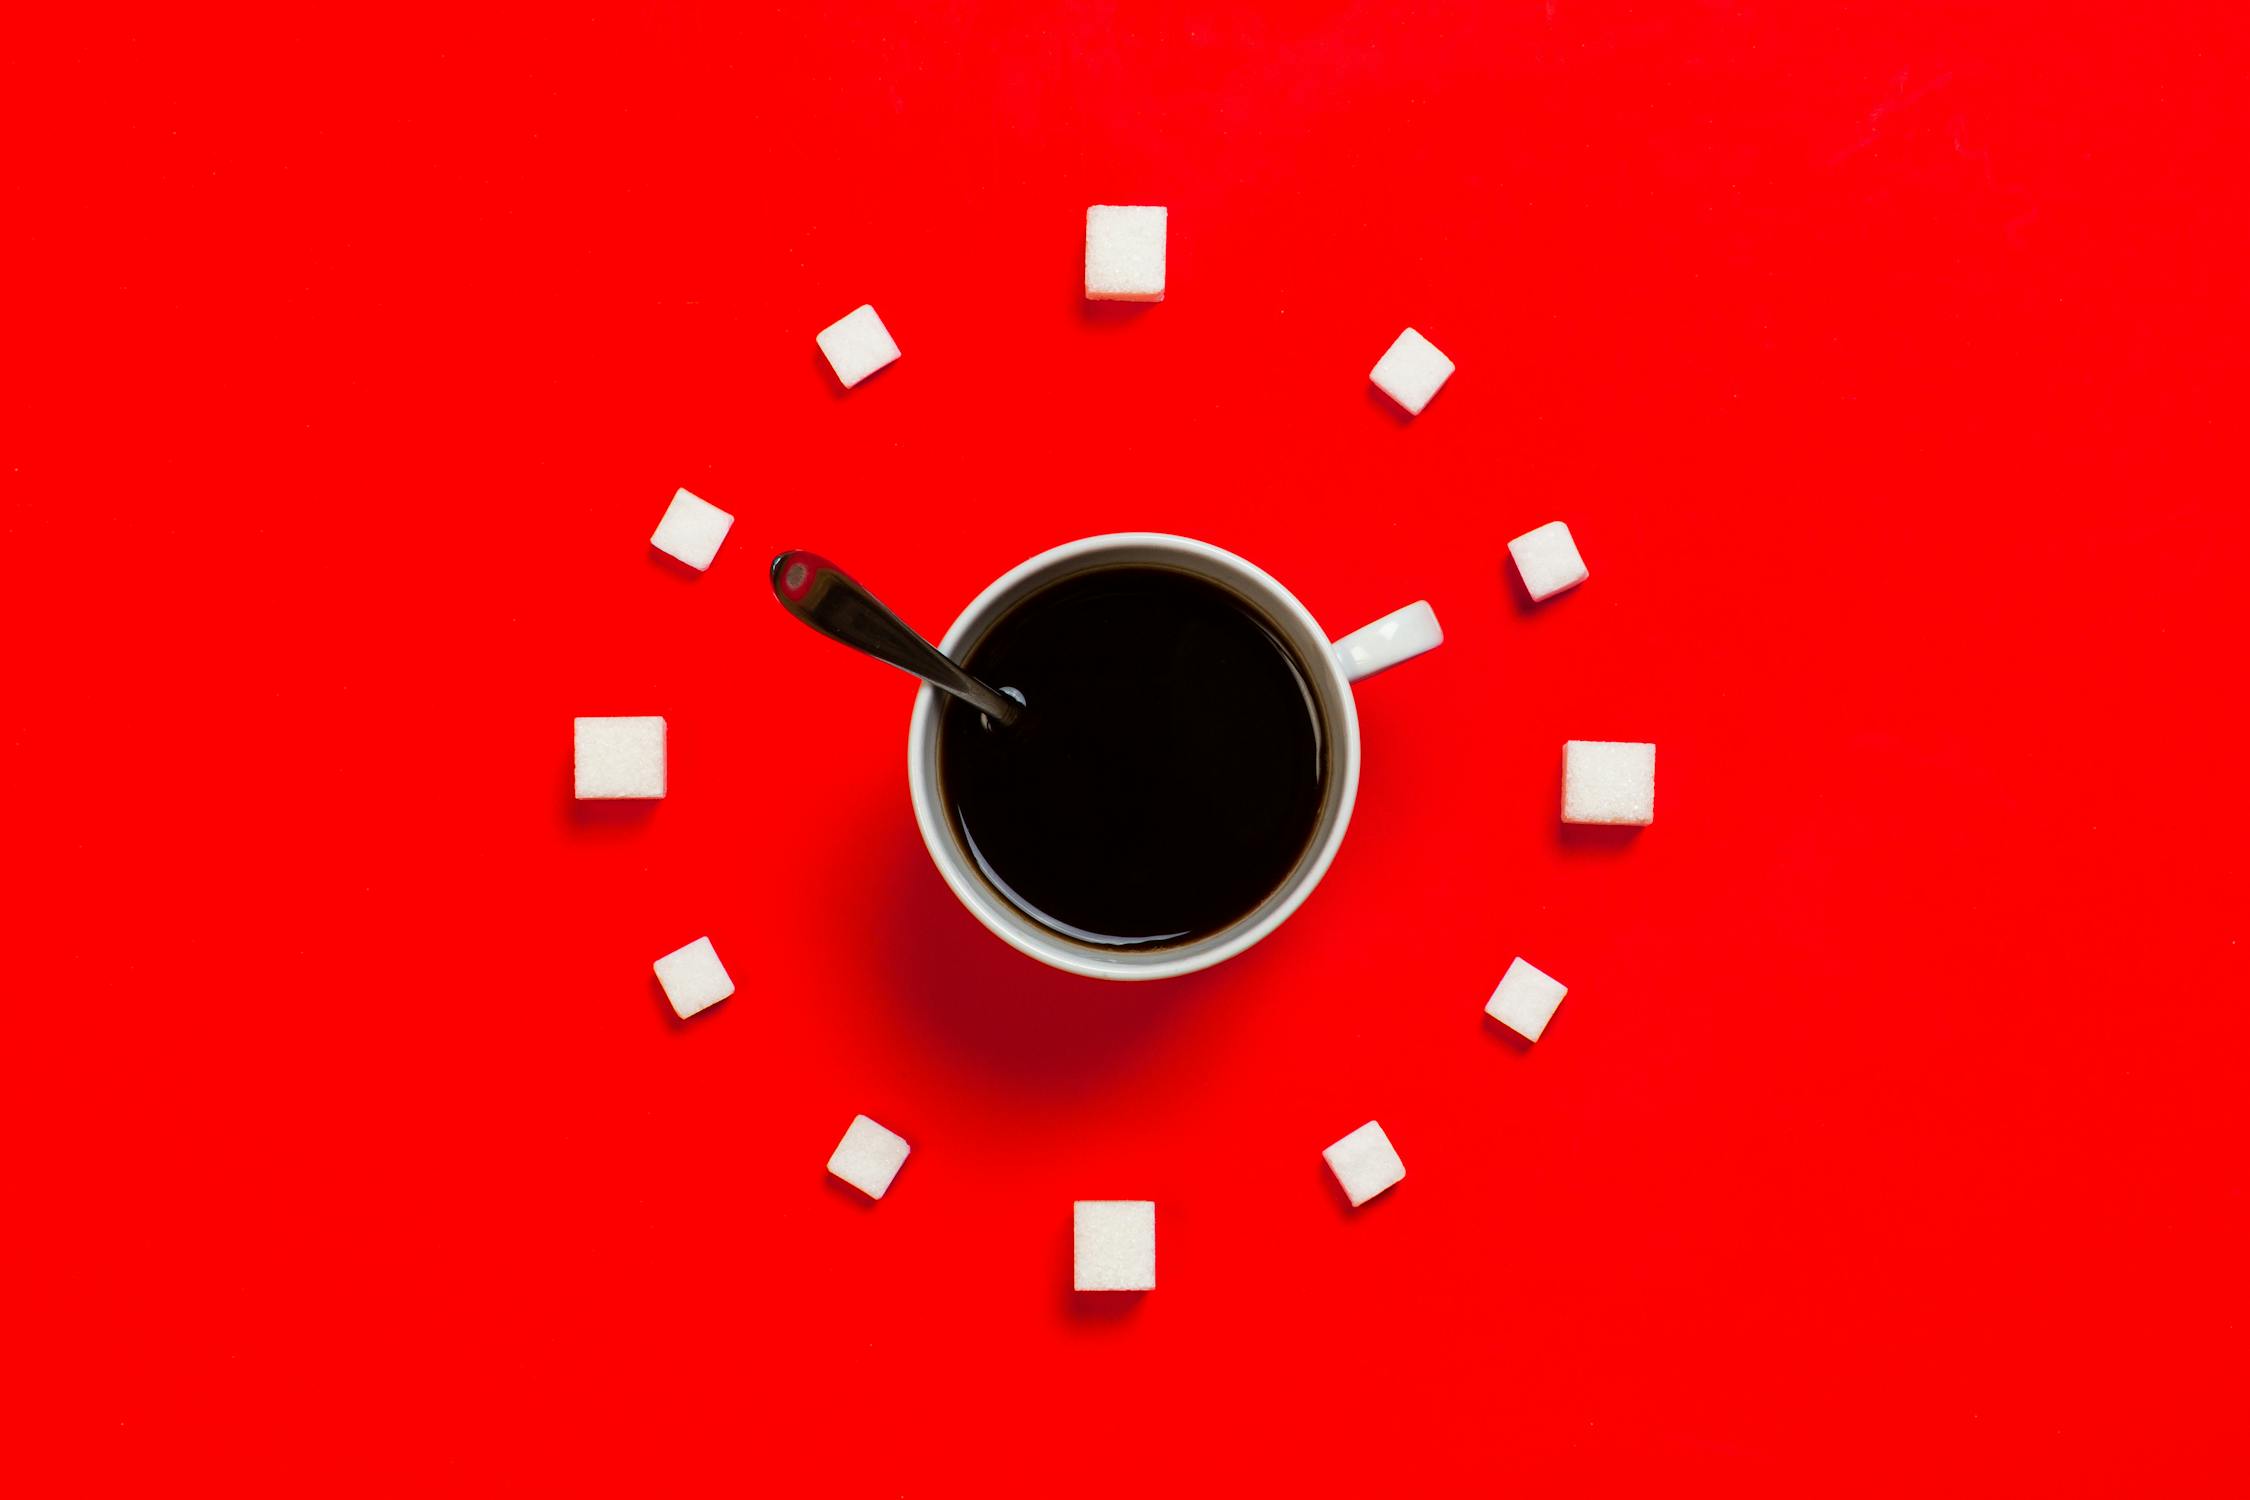 Time Management Photo by Stas Knop from Pexels: https://www.pexels.com/photo/white-mug-on-red-background-2916450/